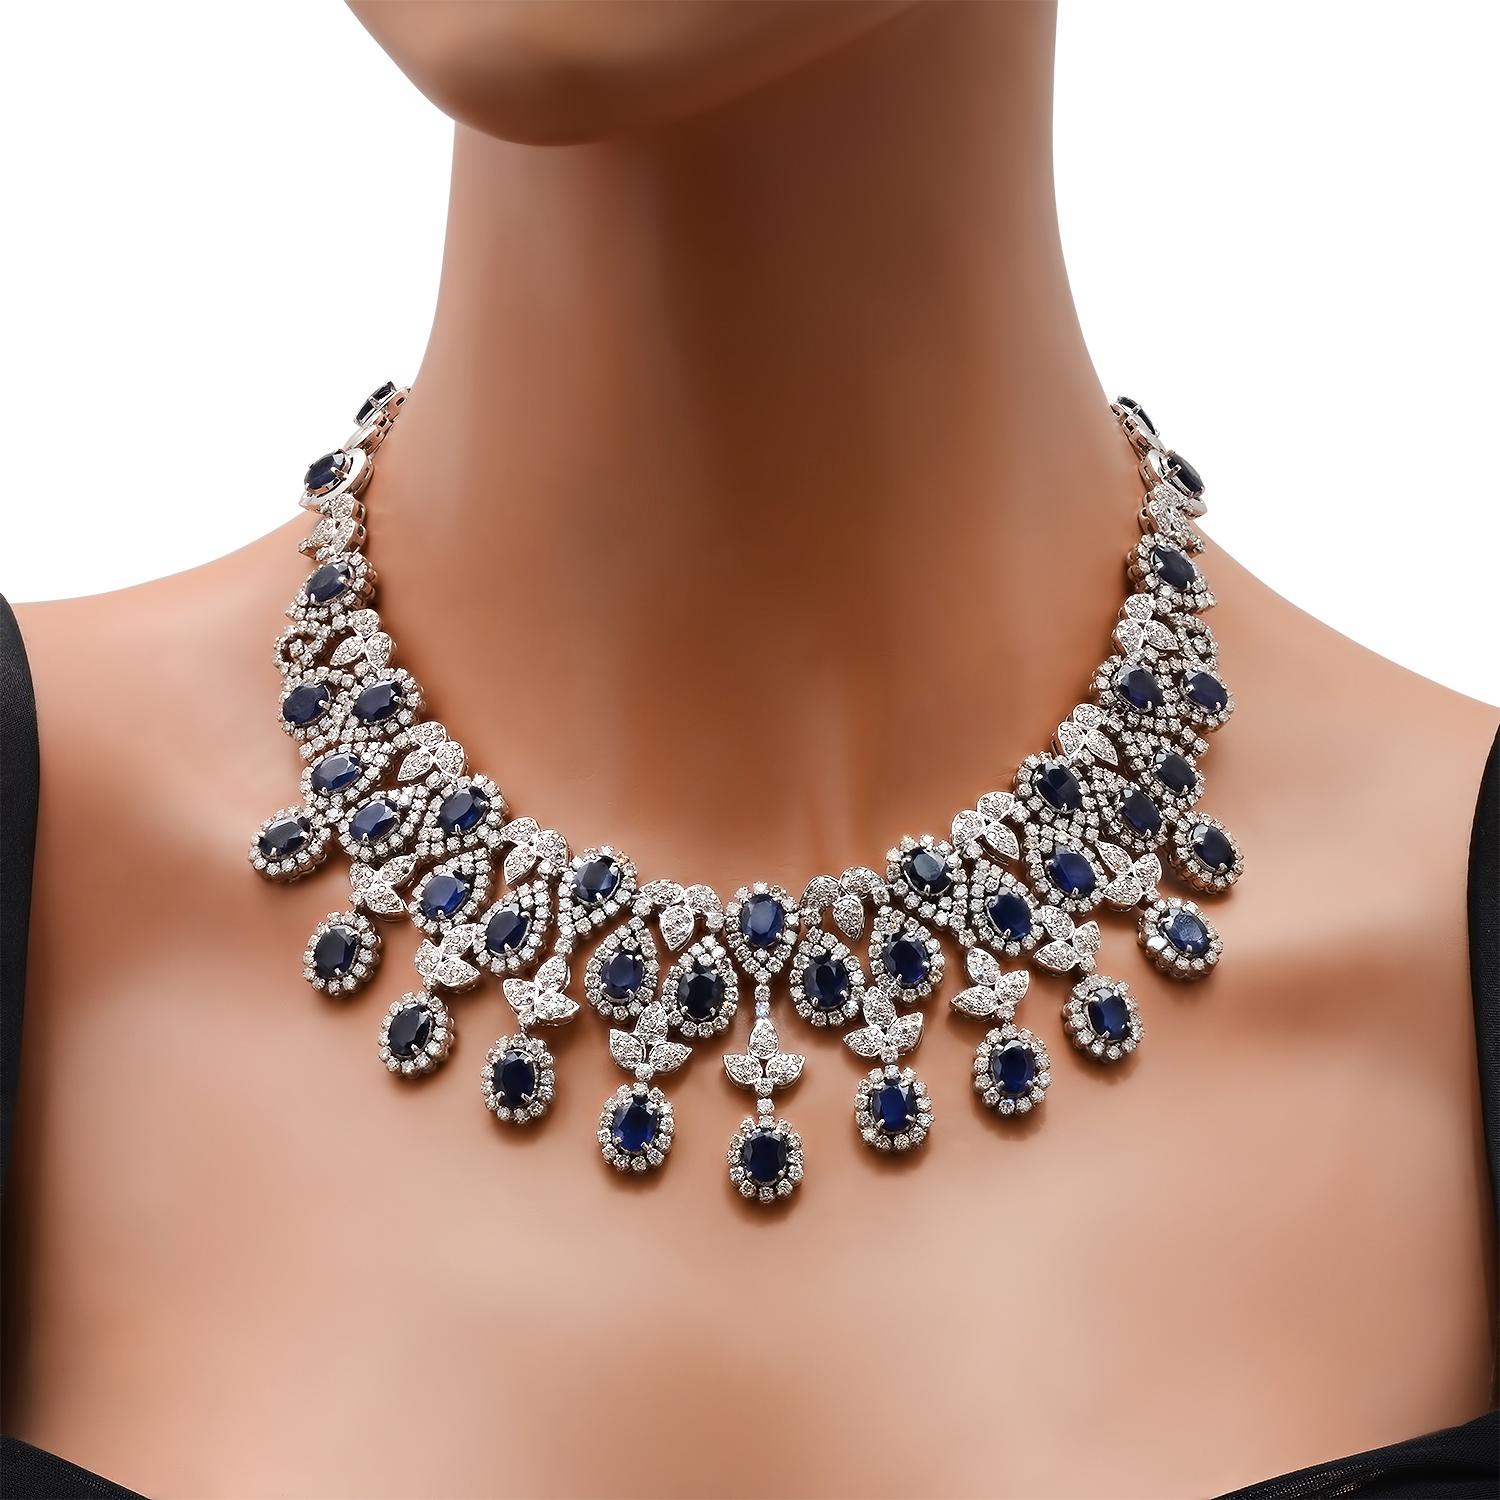 18K White Gold 75.40ct Sapphire and 17.95ct Diamond Necklace and Earring Set